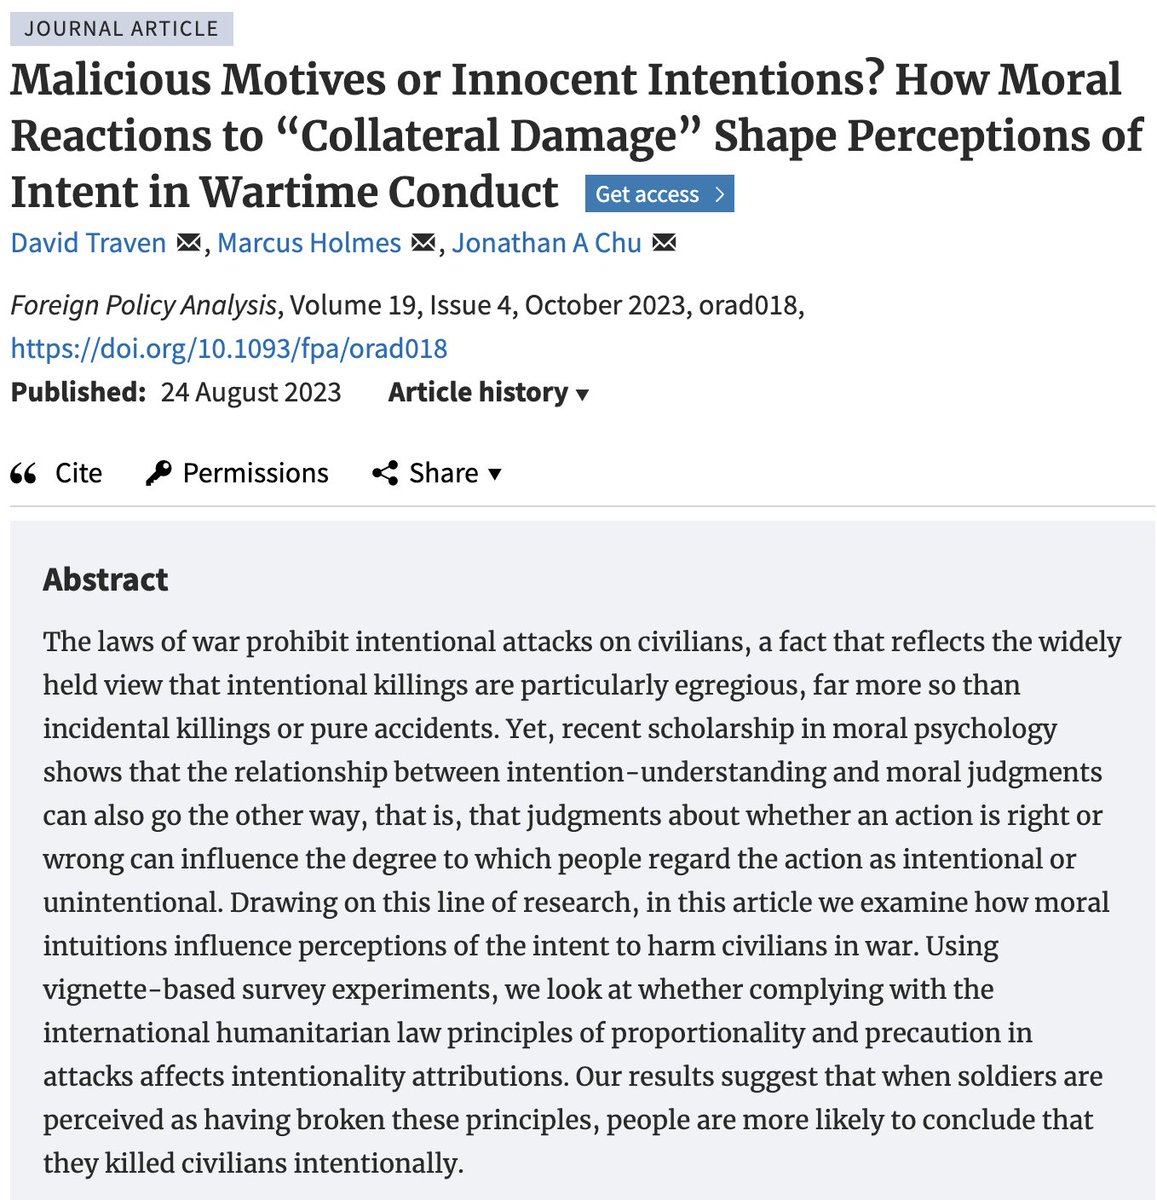 Do international principles impact how we view civilian killings? David Traven, @Prof_MHolmes , & Jonathan A Chu use vignette-based survey experiments to see how moral intuitions influence perceptions of the intent to harm civilians in war. #ForeignPolicy academic.oup.com/fpa/article-ab…